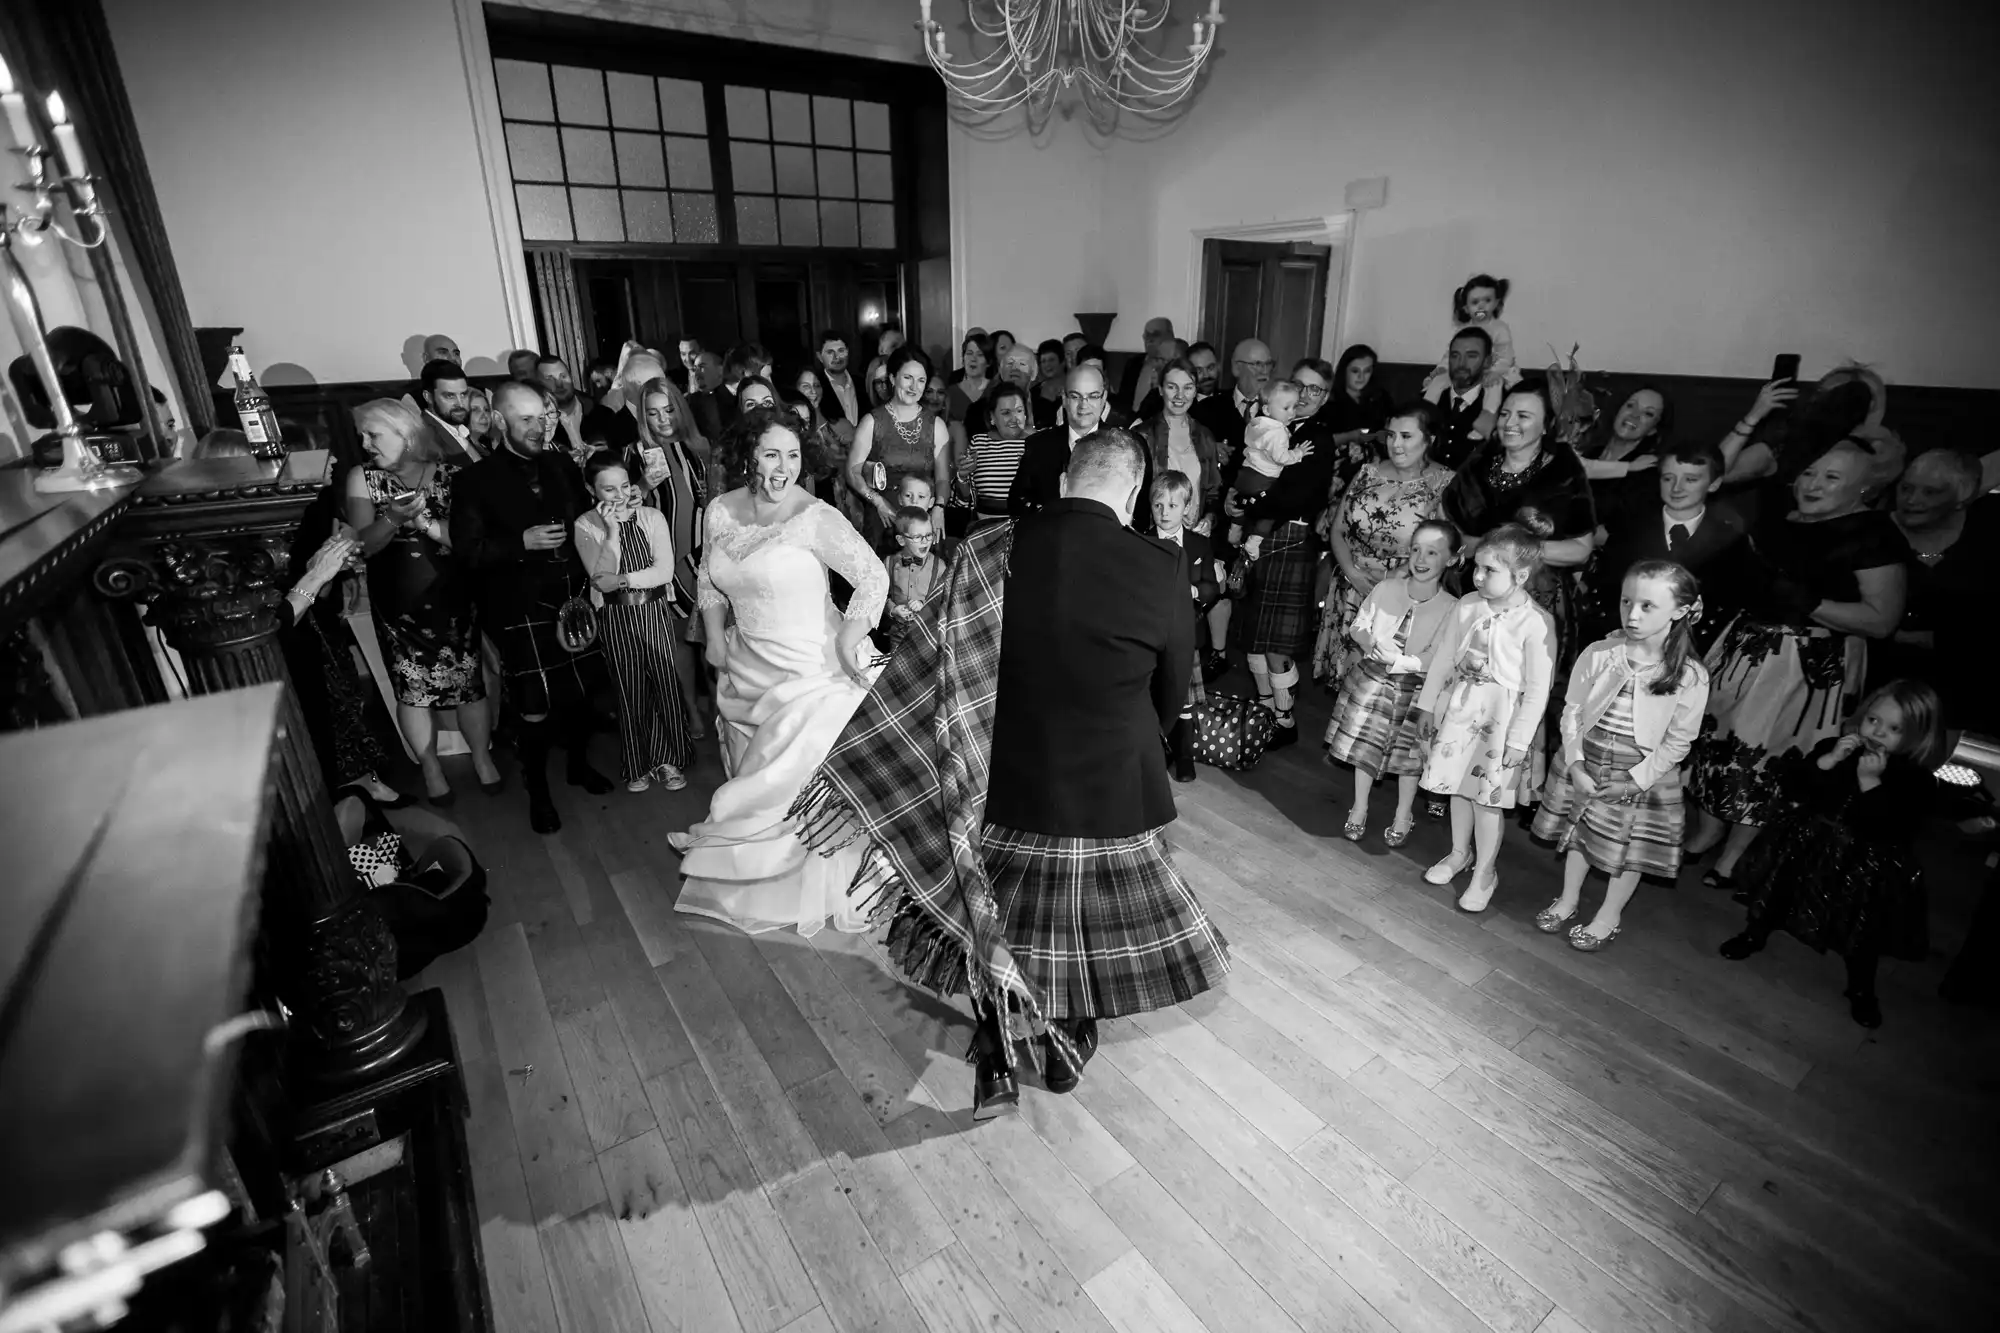 A bride and groom dance in a room filled with guests. Many attendees, including children, wear traditional Scottish attire. The setting is a wooden floored hall with large windows and a chandelier.